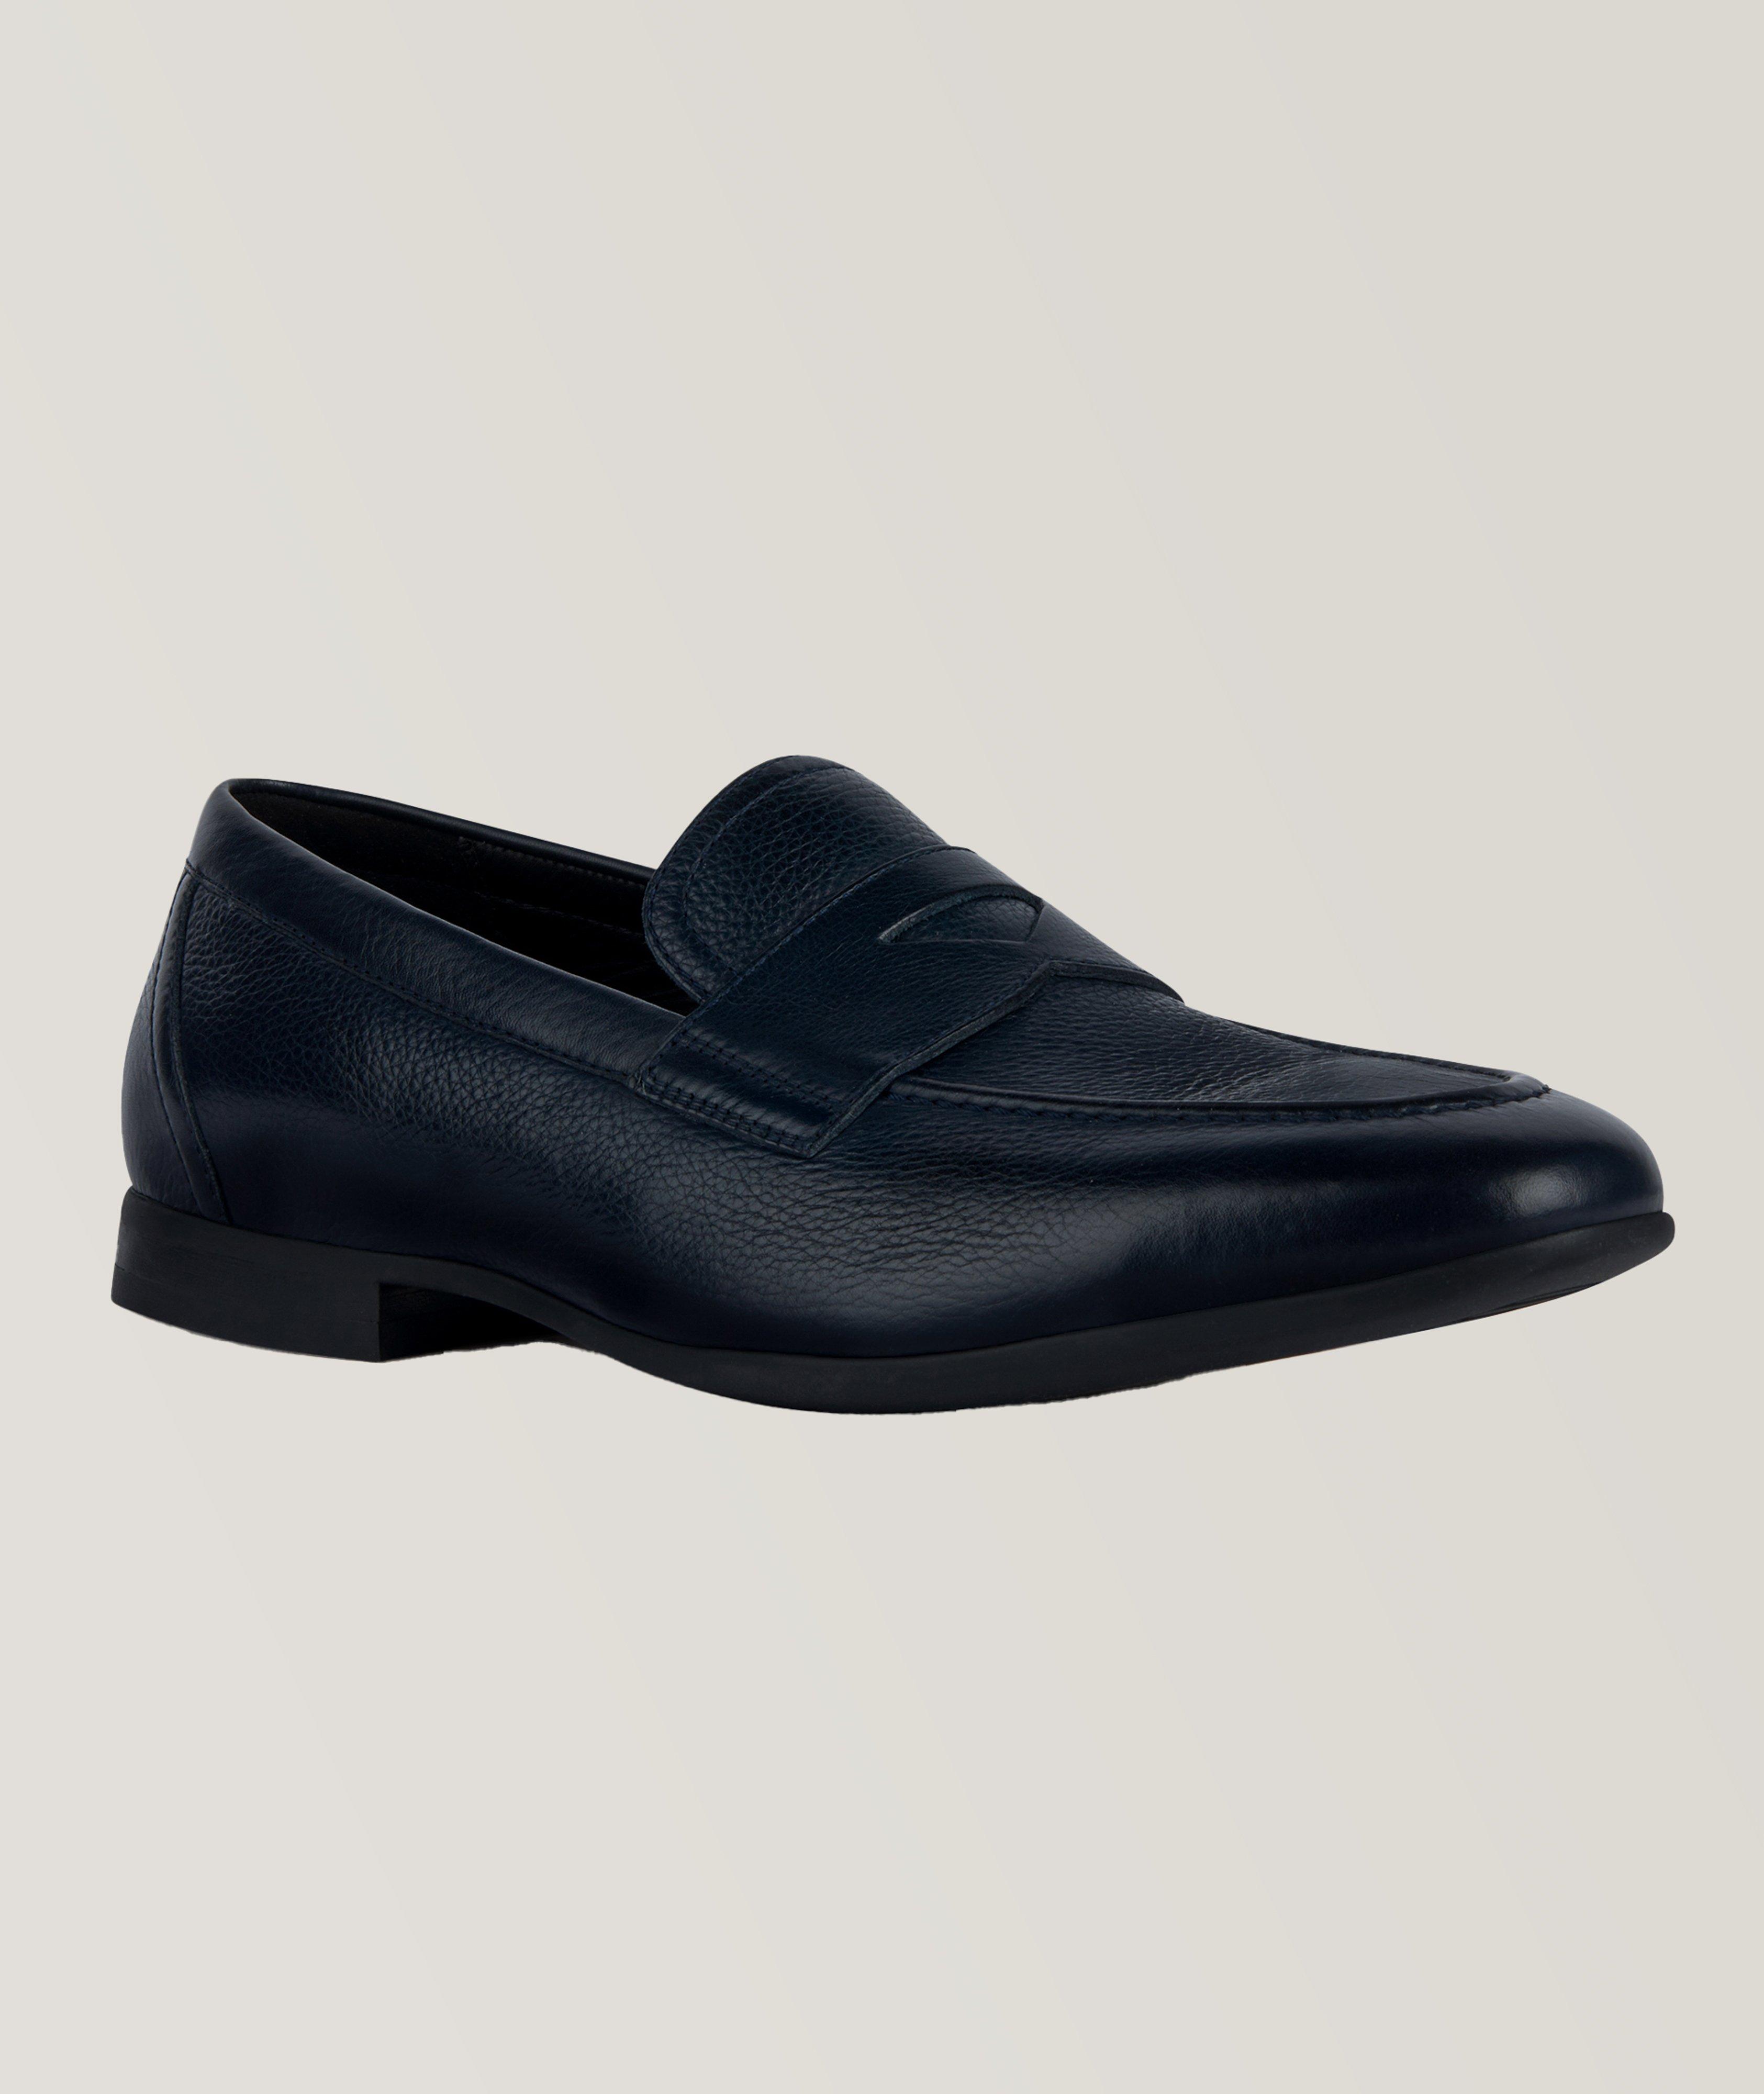 Sapienza Leather Loafers image 0